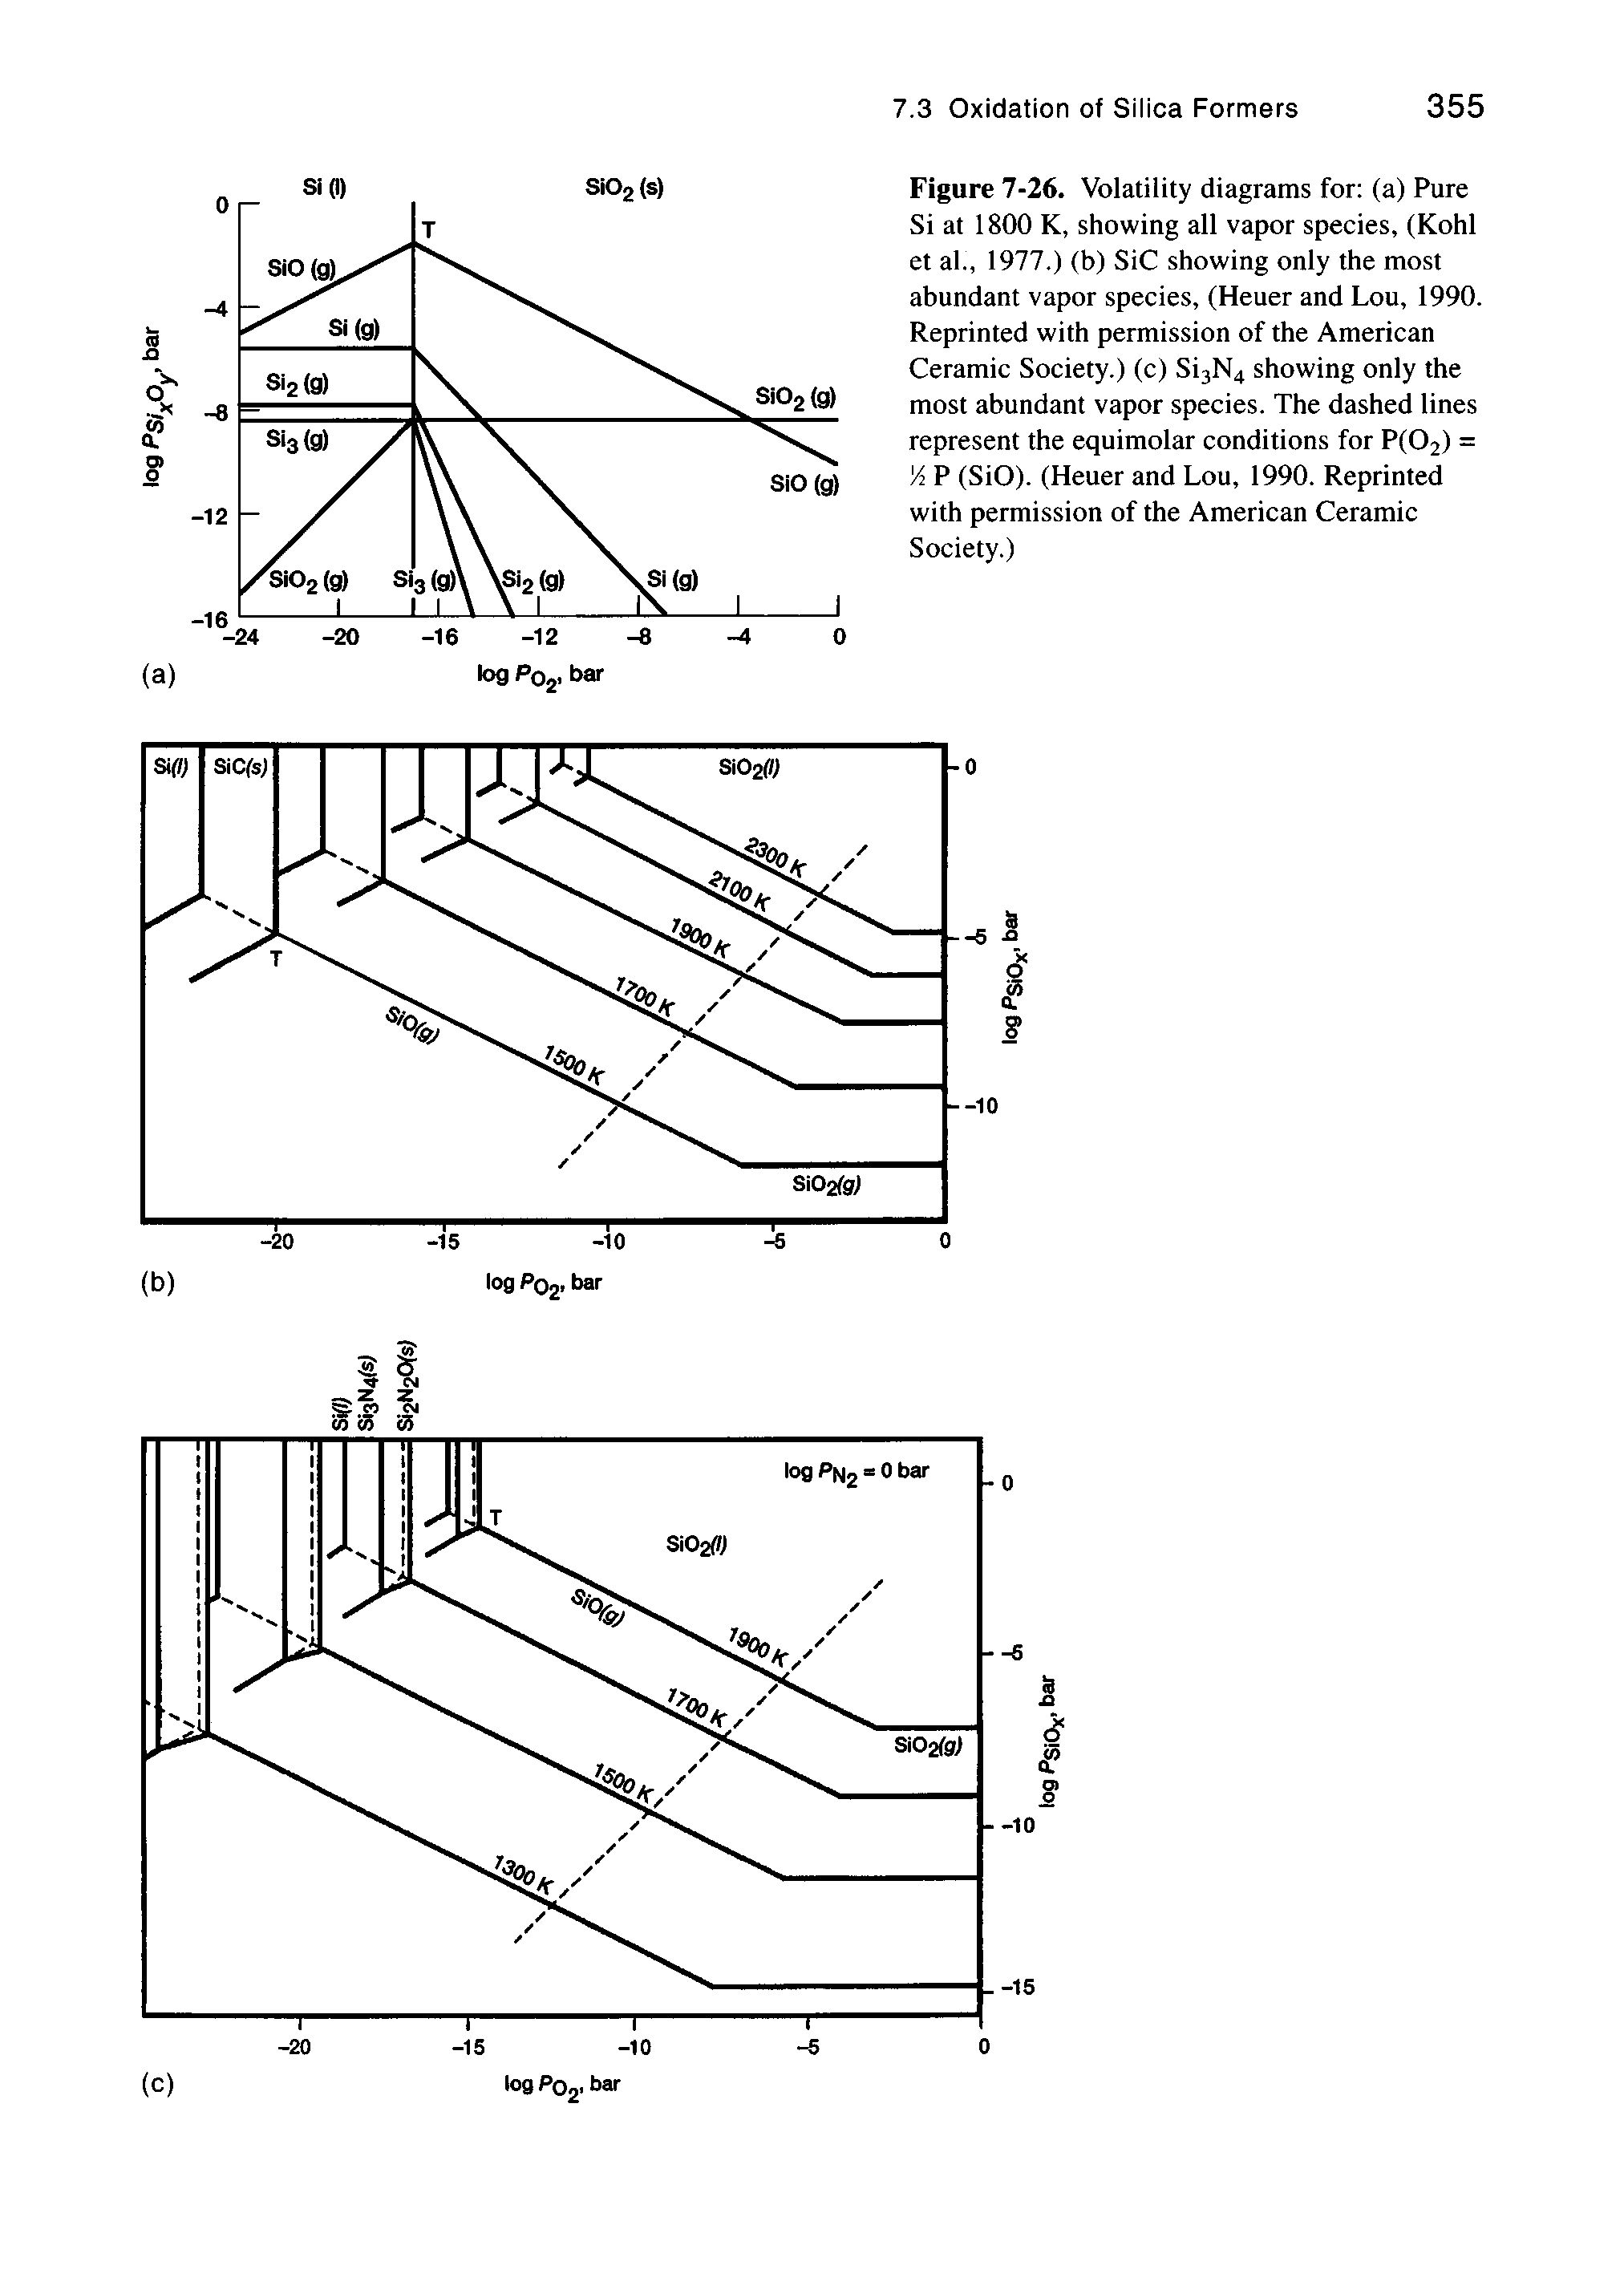 Figure 7-26. Volatility diagrams for (a) Pure Si at 1800 K, showing all vapor species, (Kohl et al., 1977.) (b) SiC showing only the most abundant vapor species, (Heuer and Lou, 1990. Reprinted with permission of the American Ceramic Society.) (c) Si3N4 showing only the most abundant vapor species. The dashed lines represent the equimolar conditions for P(02) = A P (SiO). (Heuer and Lou, 1990. Reprinted with permission of the American Ceramic Society.)...